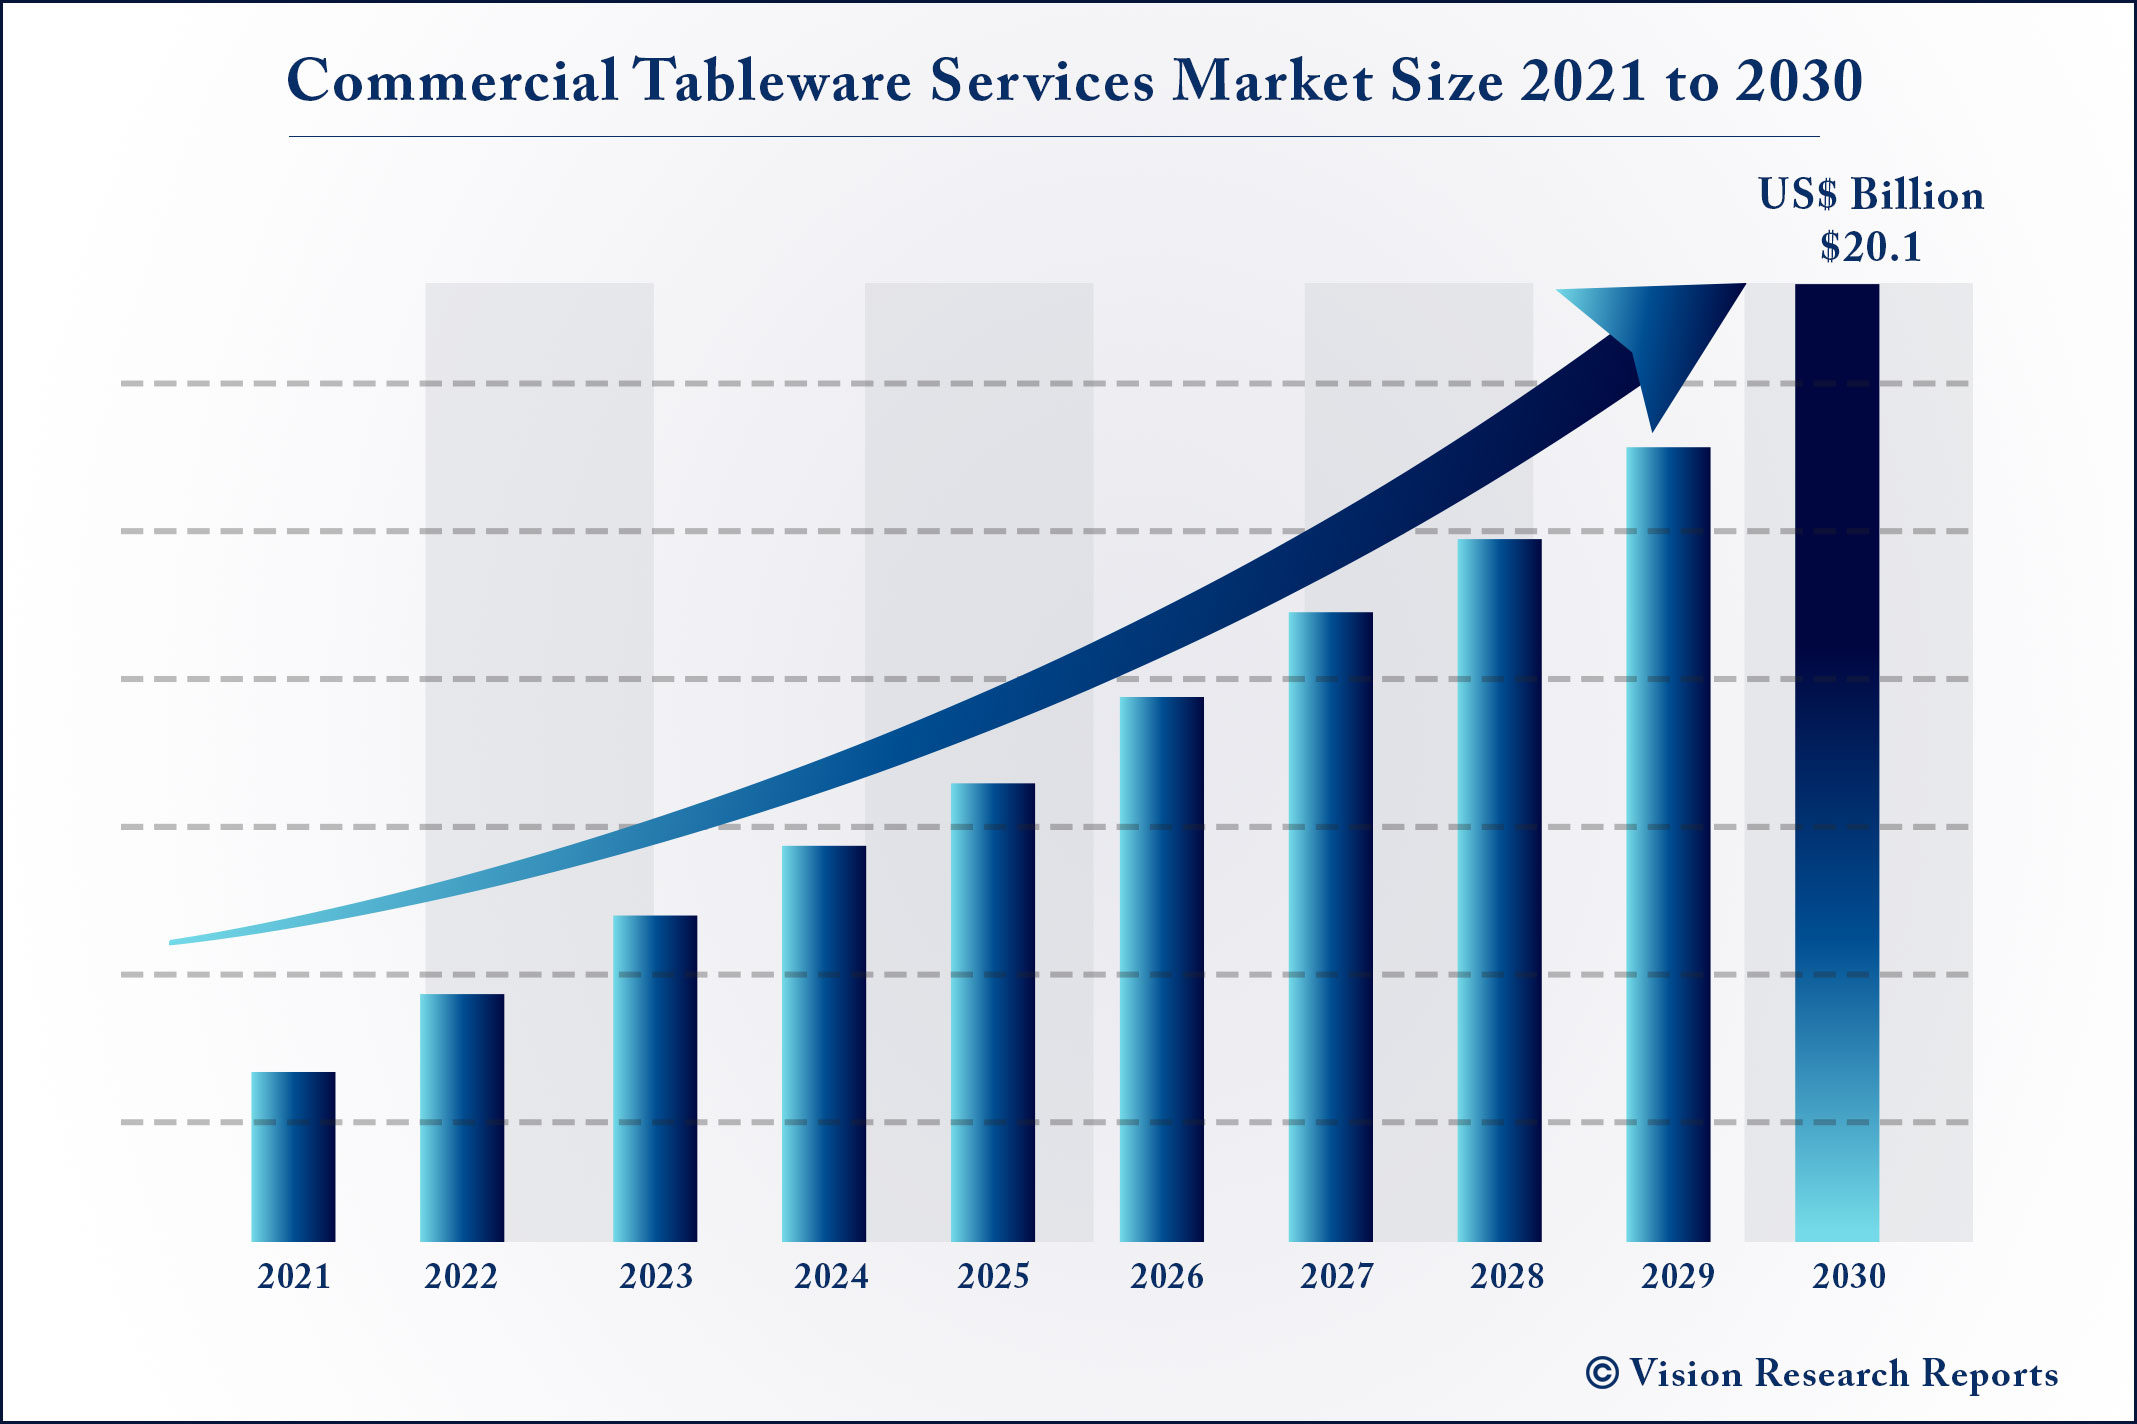 Commercial Tableware Services Market Size 2021 to 2030